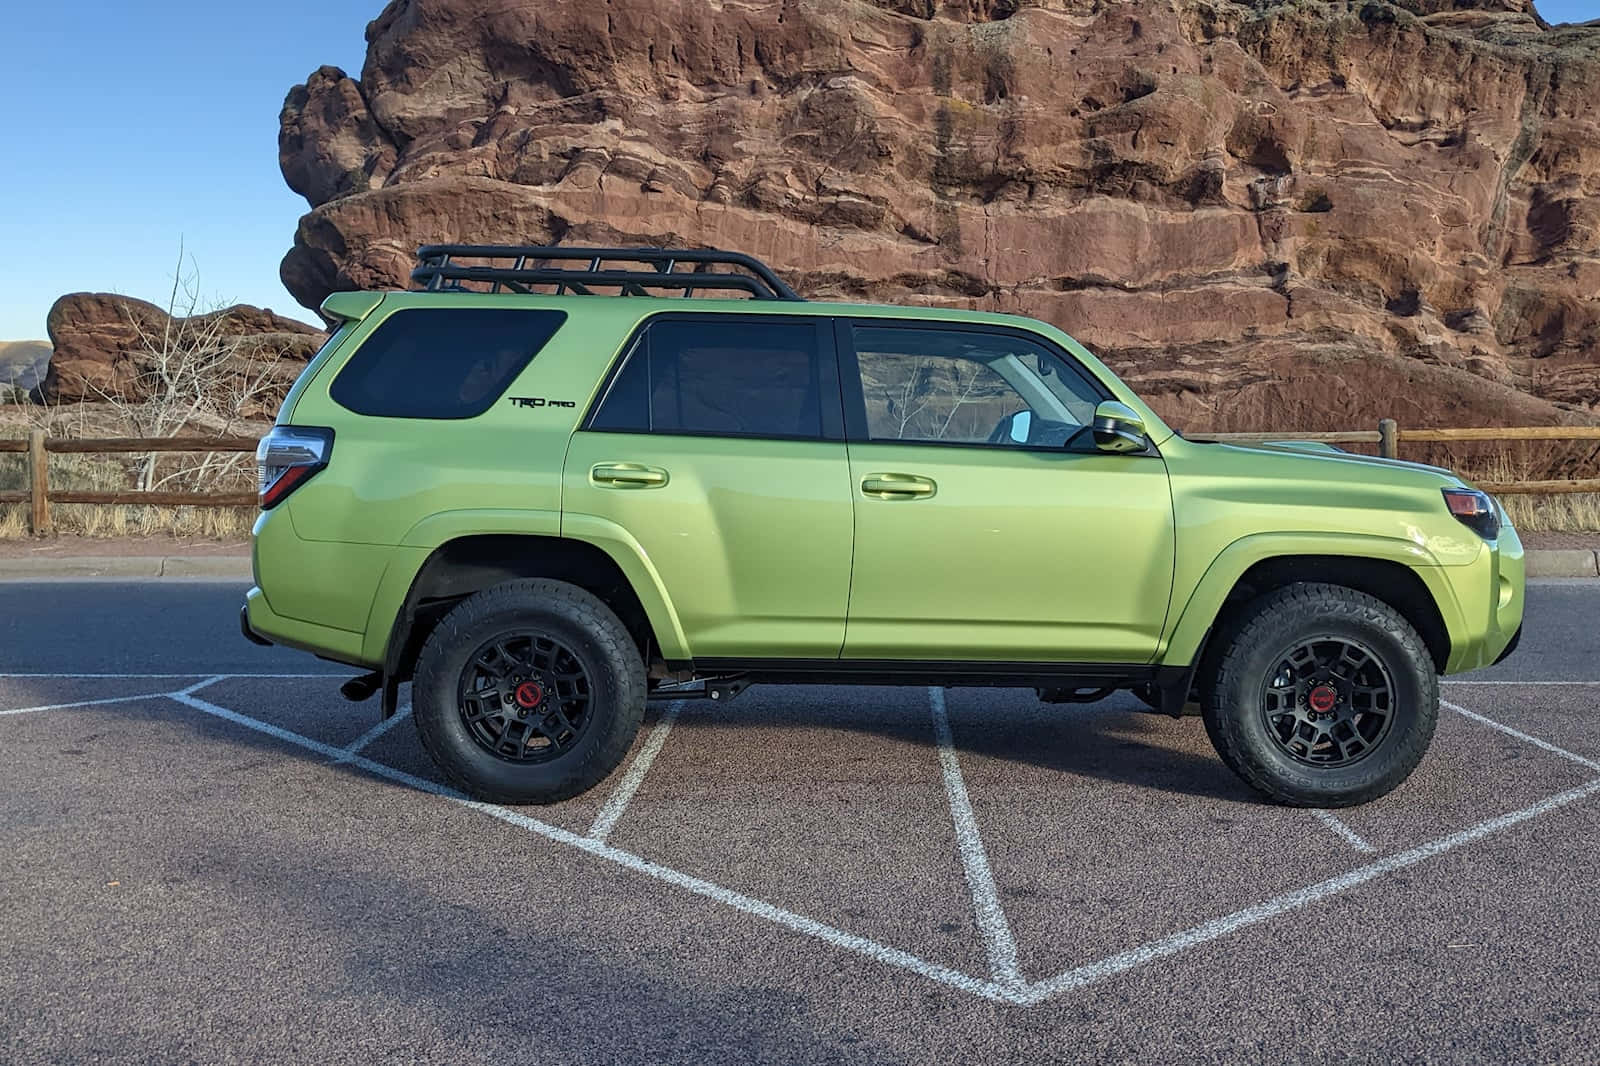 A Green Toyota 4runner Parked In A Parking Lot